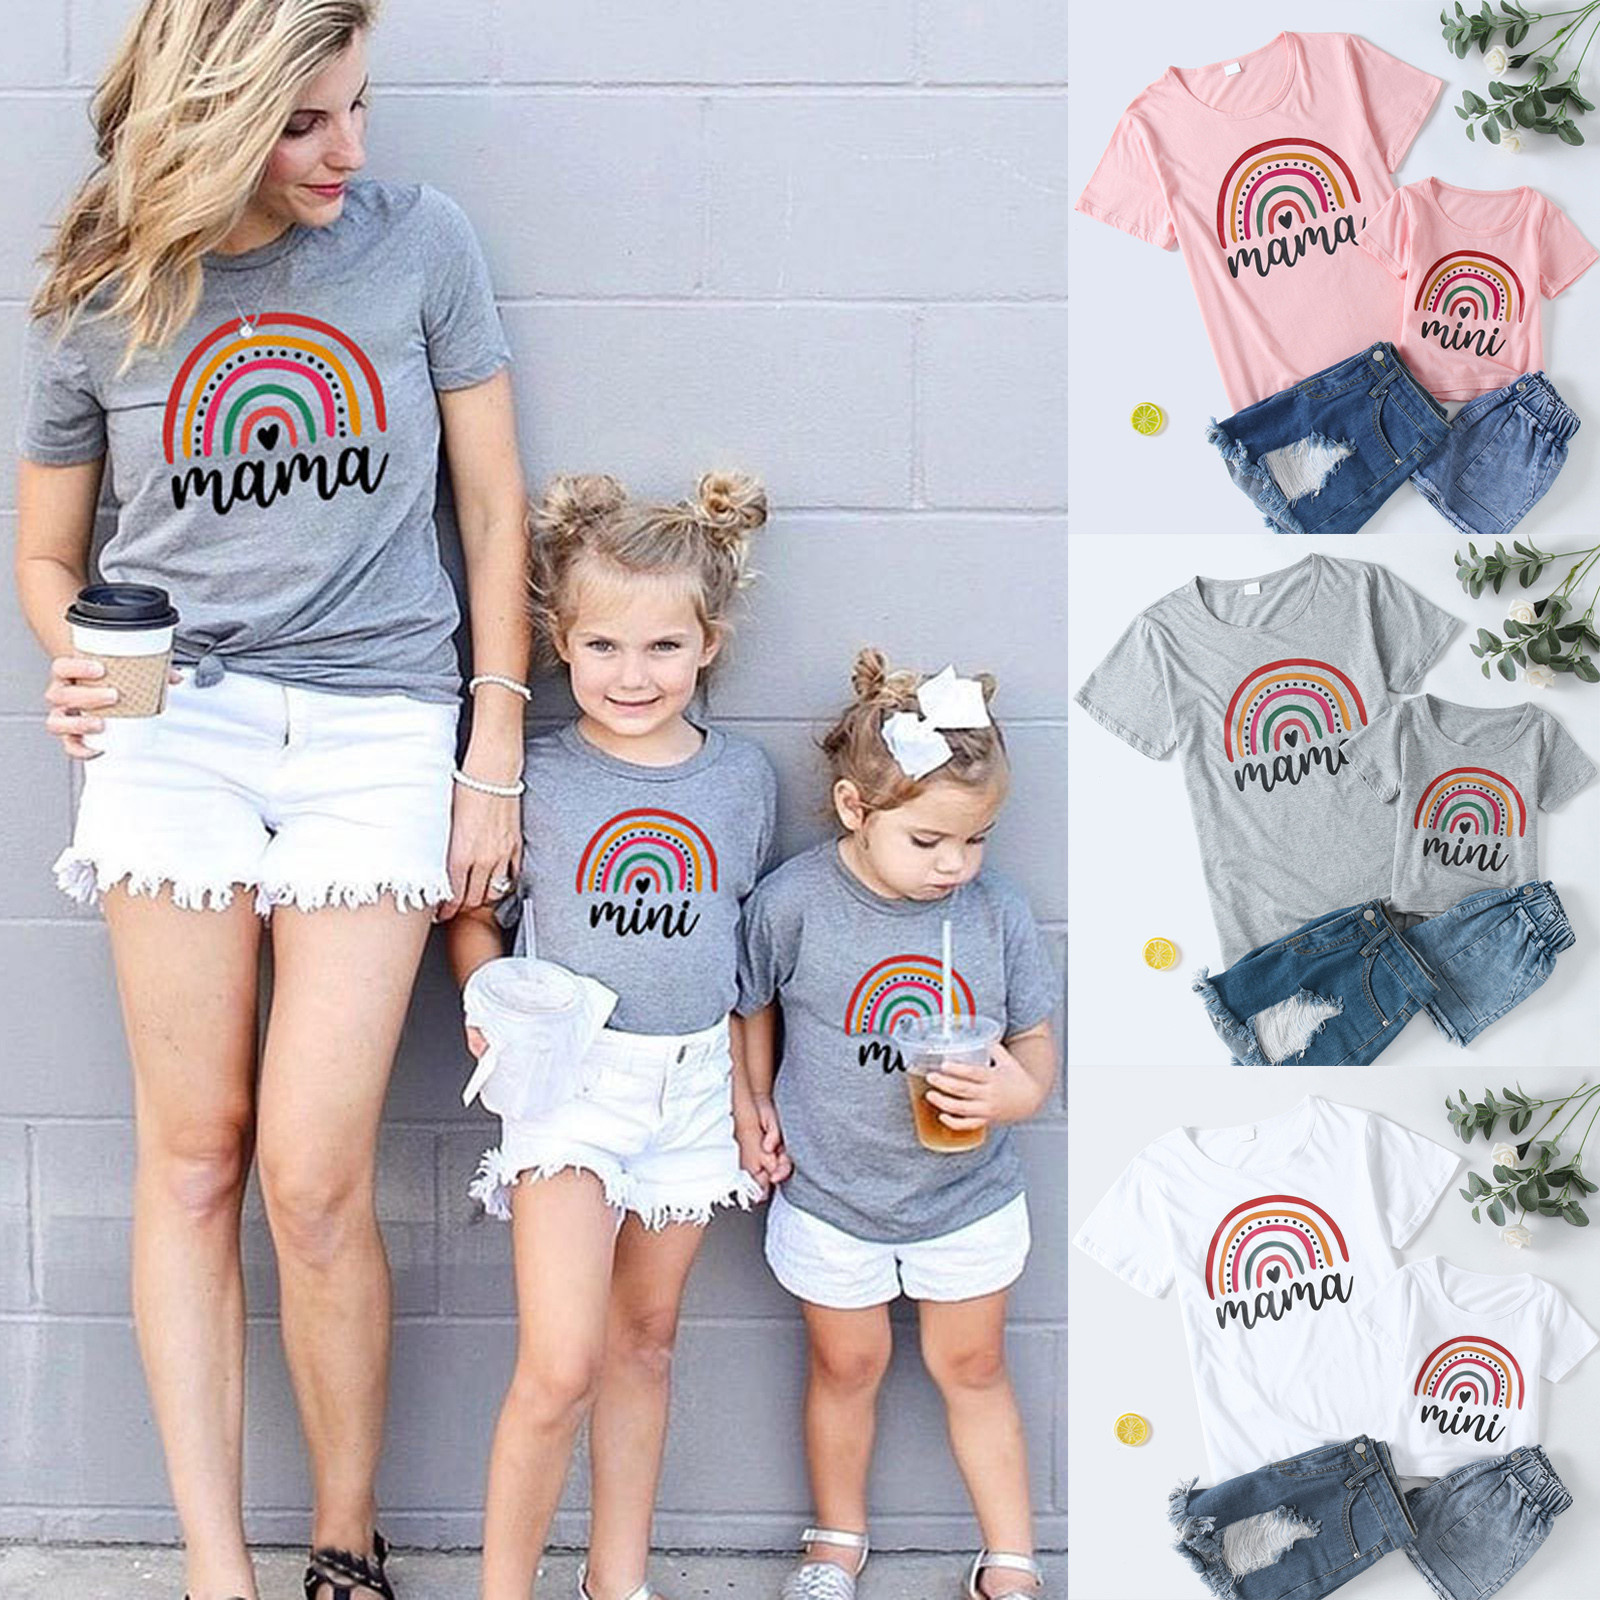 TAIAOJING Mommy and Me Outfits T Short Tops And Blouse Casual Kids Me Summer Clothes Shirt Outfits Sleeve Family Baby Mommy For Toddler Rainbow Tee Girls Girls Tops 2-3 Years - image 5 of 9